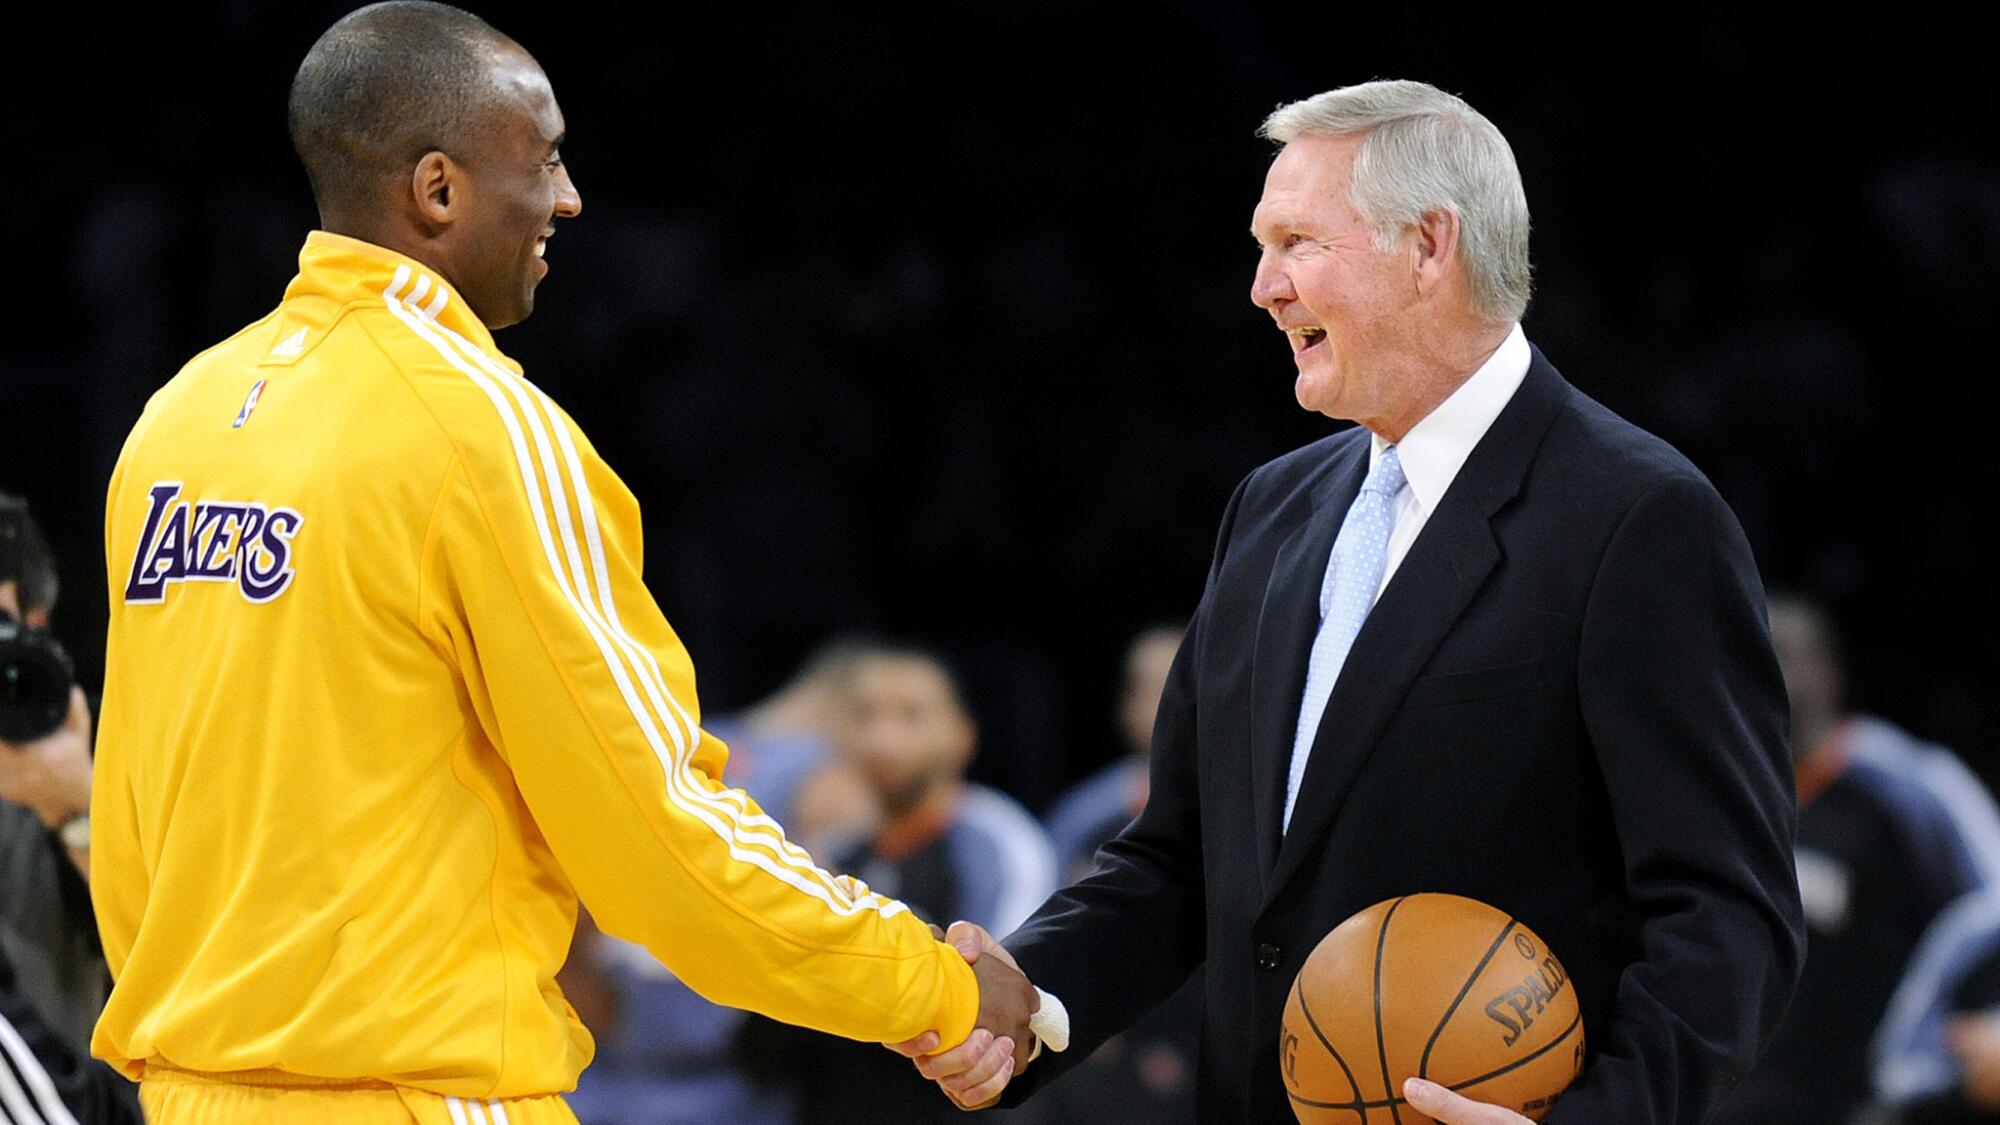 Kobe Bryant is congratulated by Jerry West during a ceremony on Feb. 3, 2010, to honor Bryant as the Lakers' leading scorer.